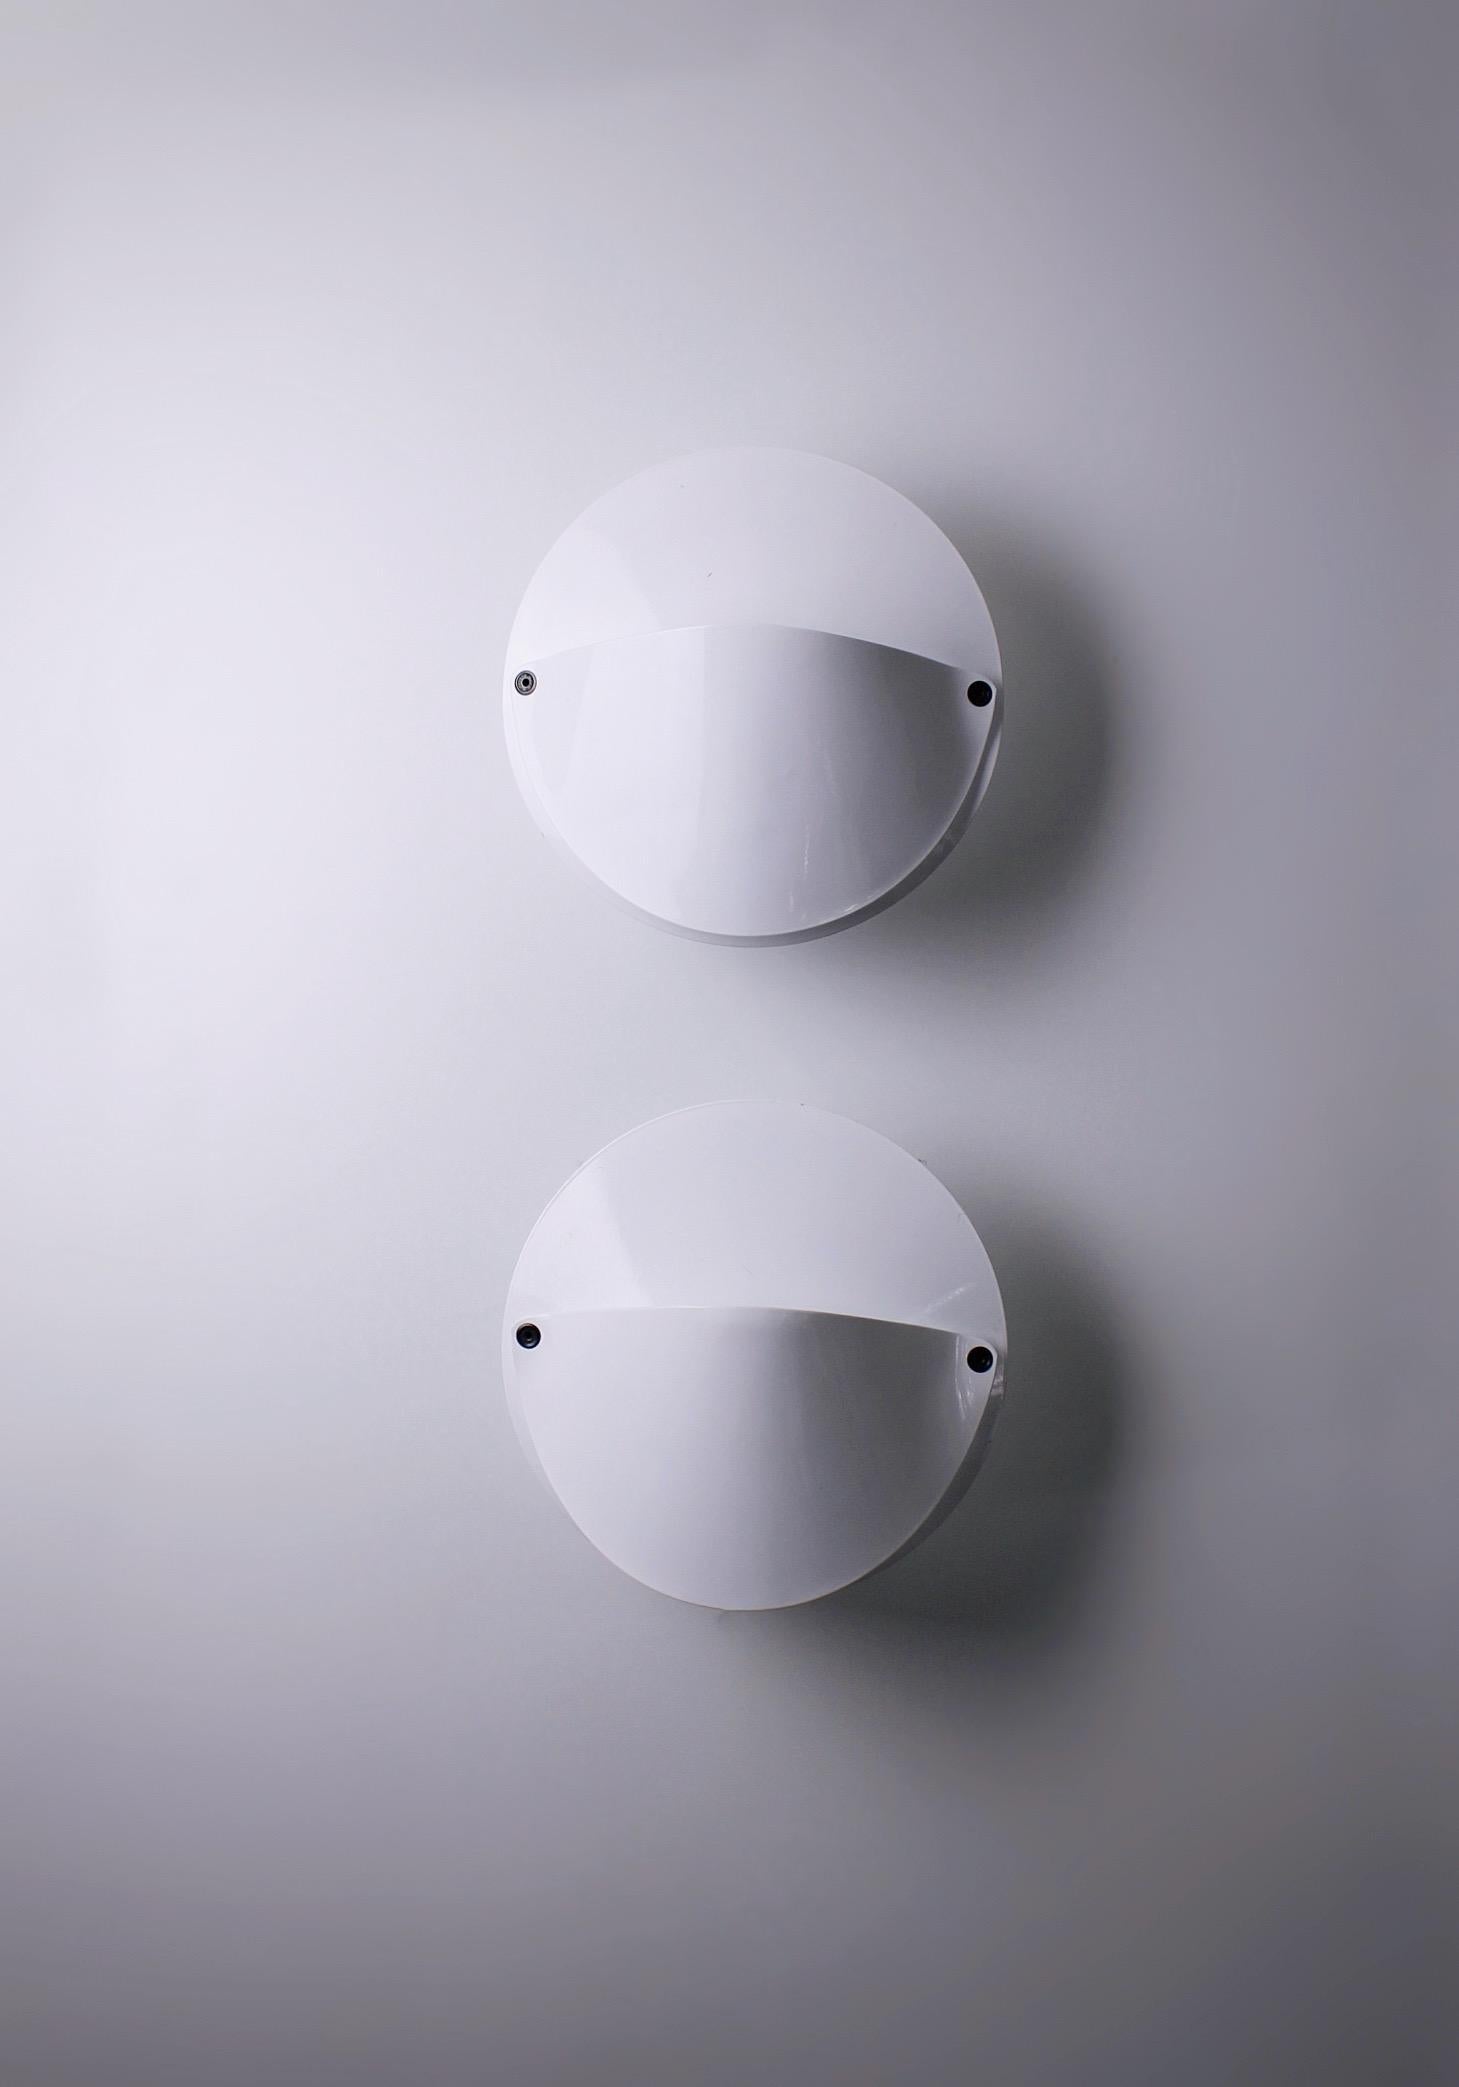 Pair of wall lamps, model Giovi. Designed by Achille Castiglioni for Flos in 1982. One of the many special designs created by Castiglioni. Fully made of white lacquered metal. The light source is covered by the white shades. Around the light source